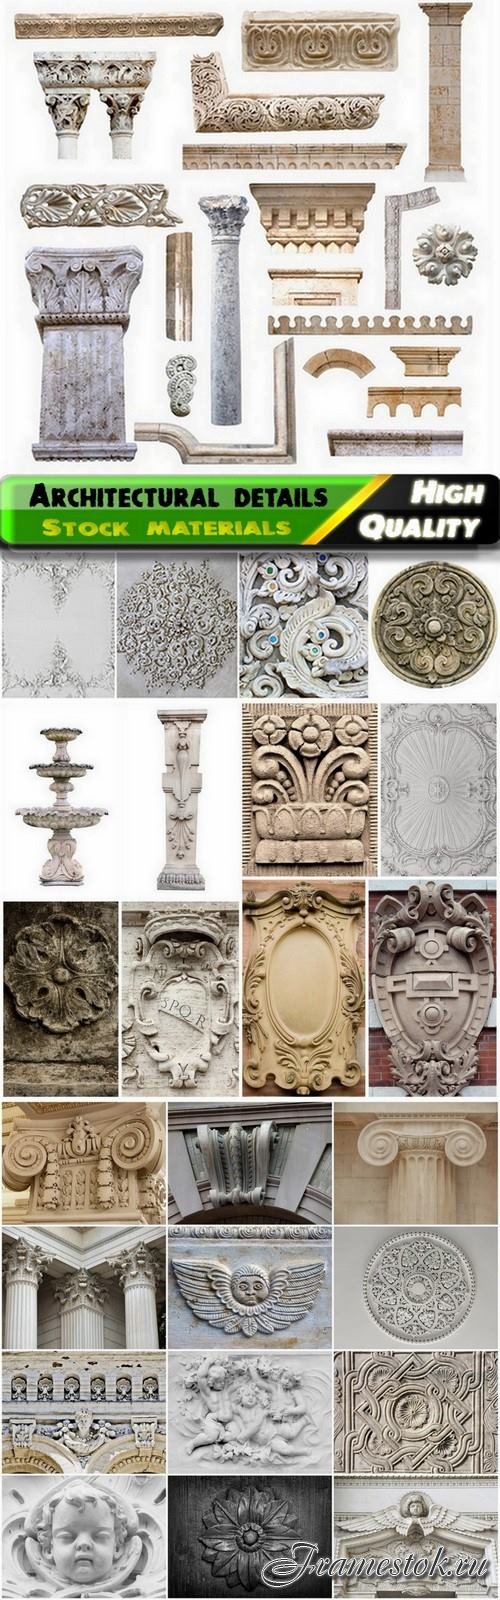 Vintage and ancient architectural details - 25 HQ Jpg